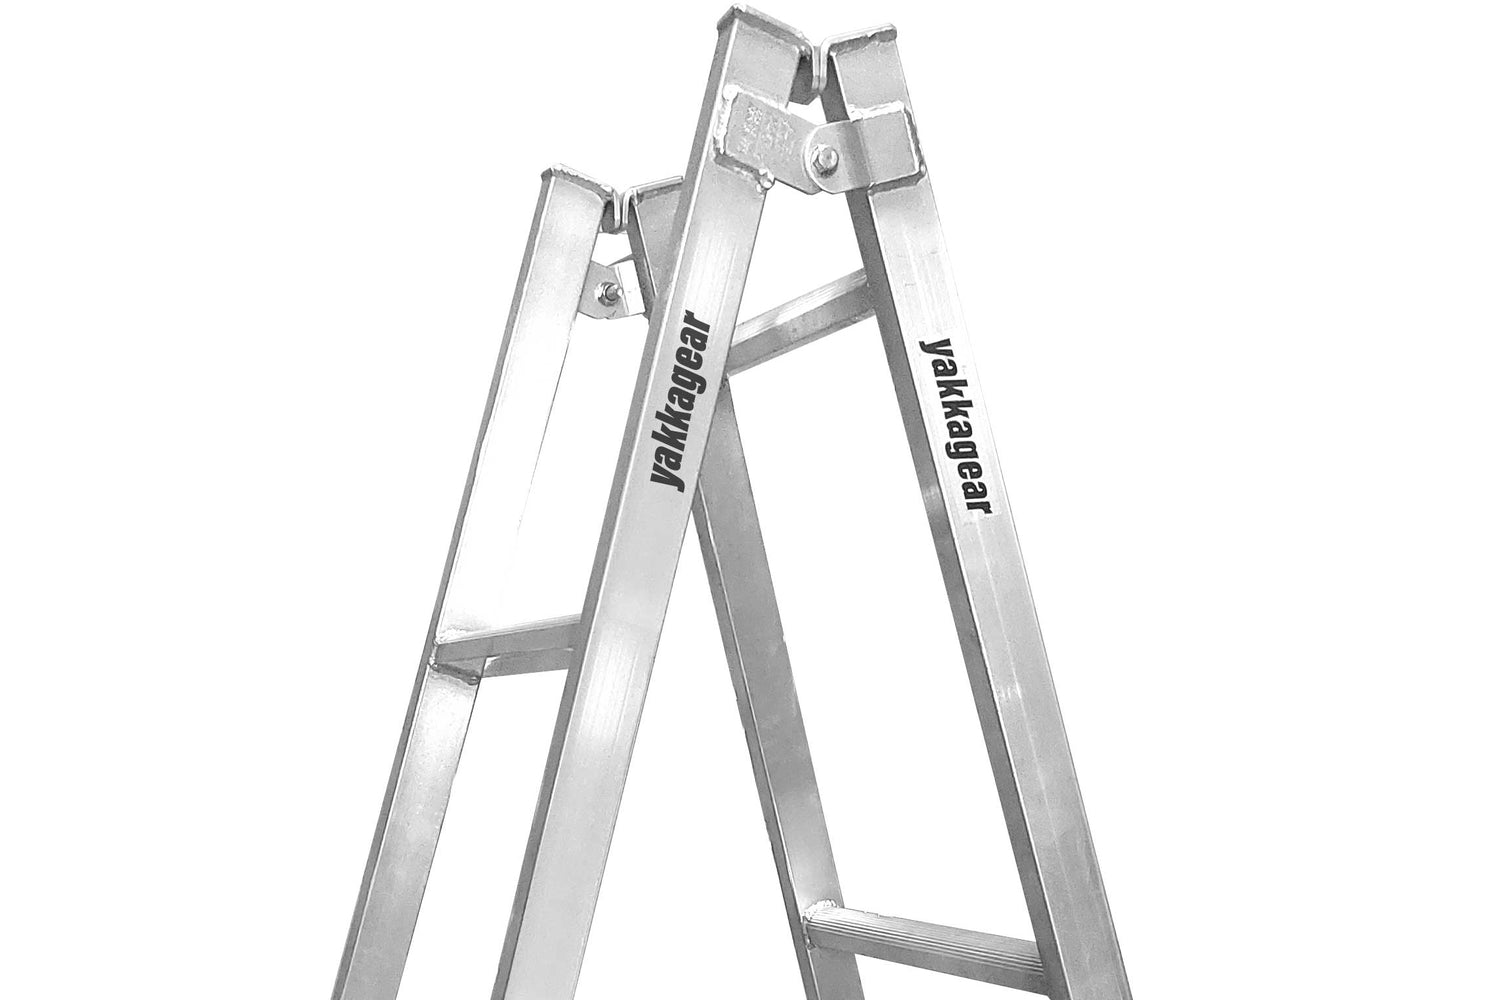 Yakka Gear Melbourne Made Sustainable Australia Aluminium Trestles as access equipment. Various sized trestles available including 1.8m, 2.4m, 3.0m, 3.6m, 4.2m, 4.8m. All the trestles are adjustable by 260mm with Adjustable legs. Zoomed in detailed view of the top of the trestle to show the alternating rungs and the aluminium. View from the side on a white background. 